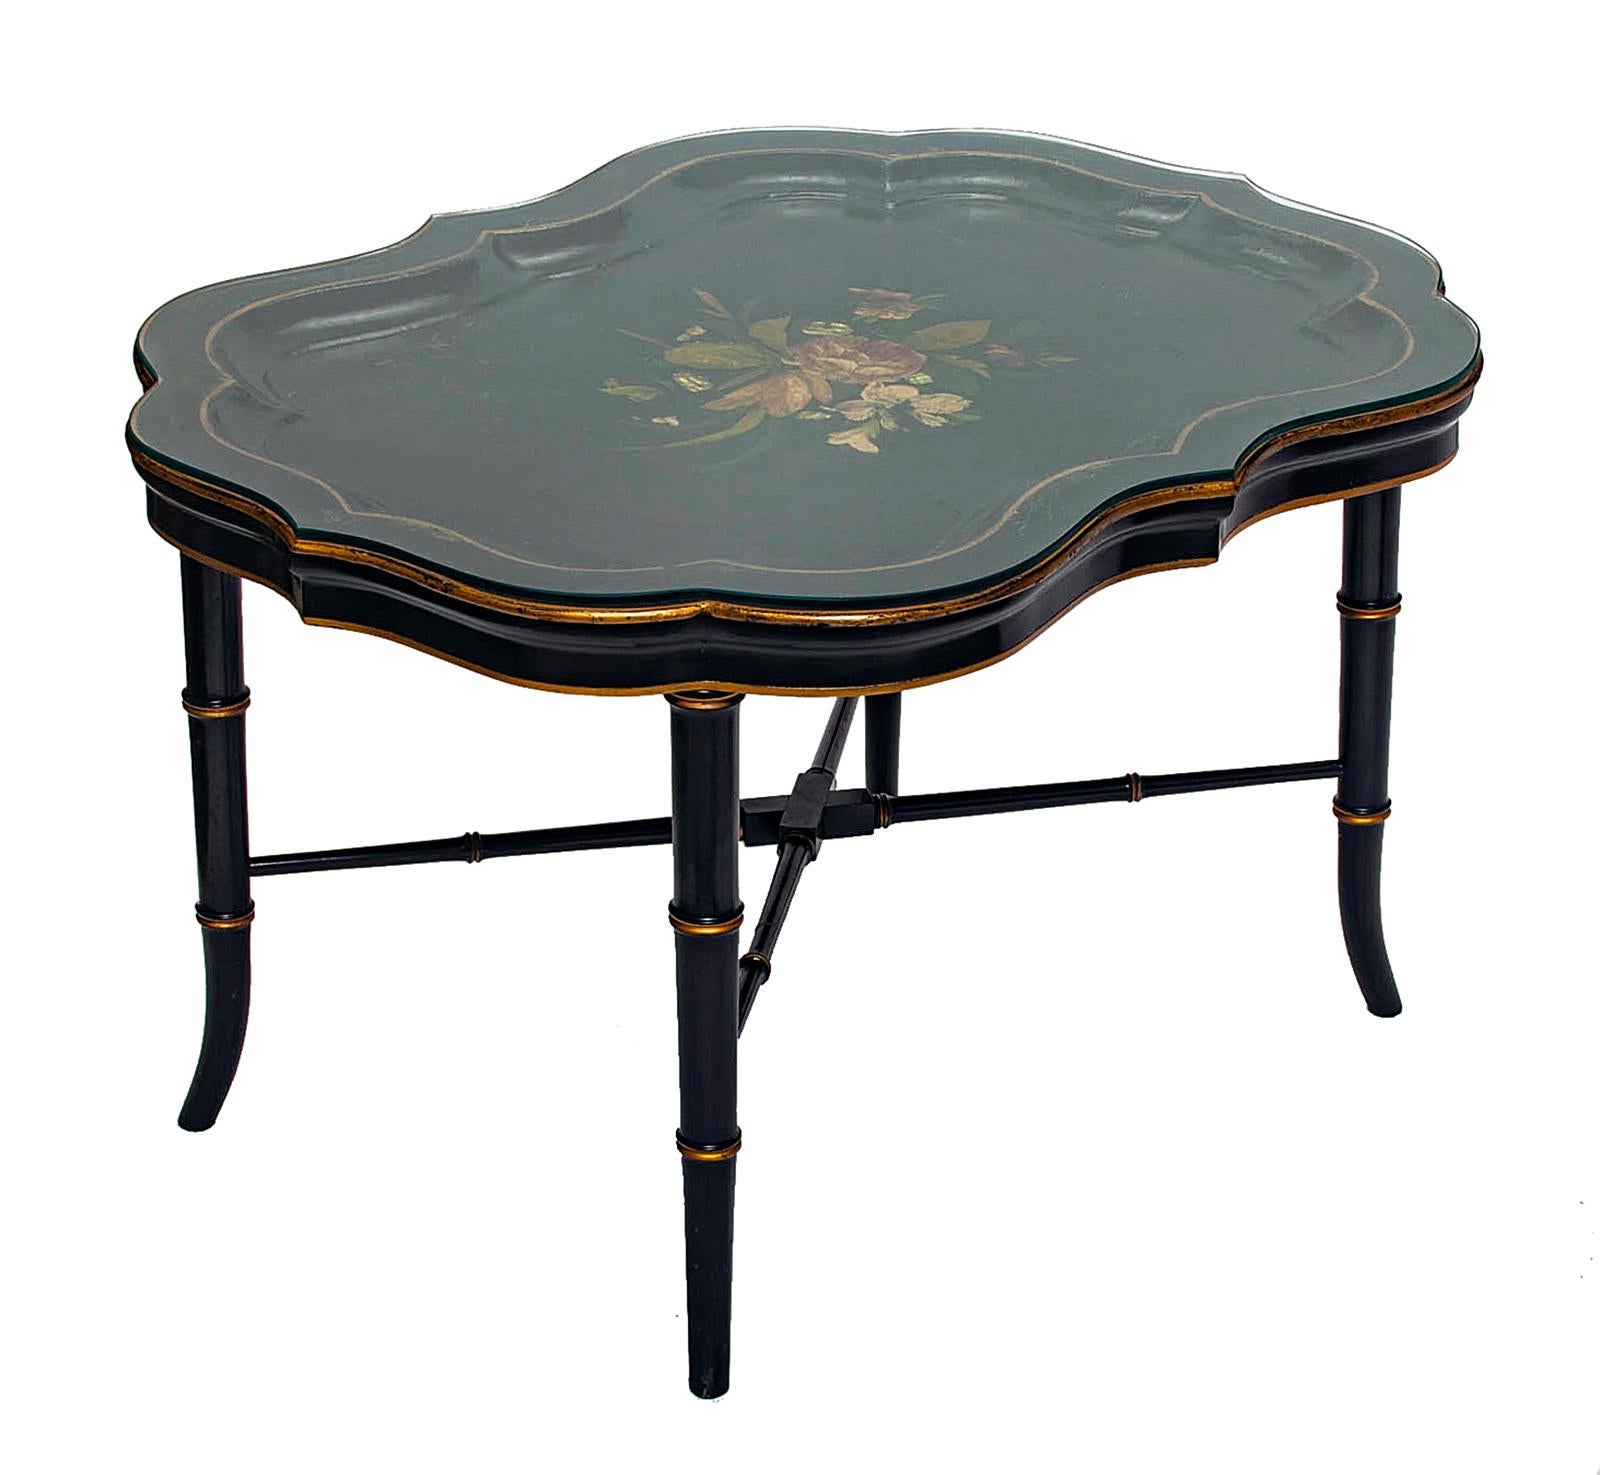 Antique Ebony Tray Table with Glass Top- 3 Pieces In Good Condition For Sale In Malibu, CA